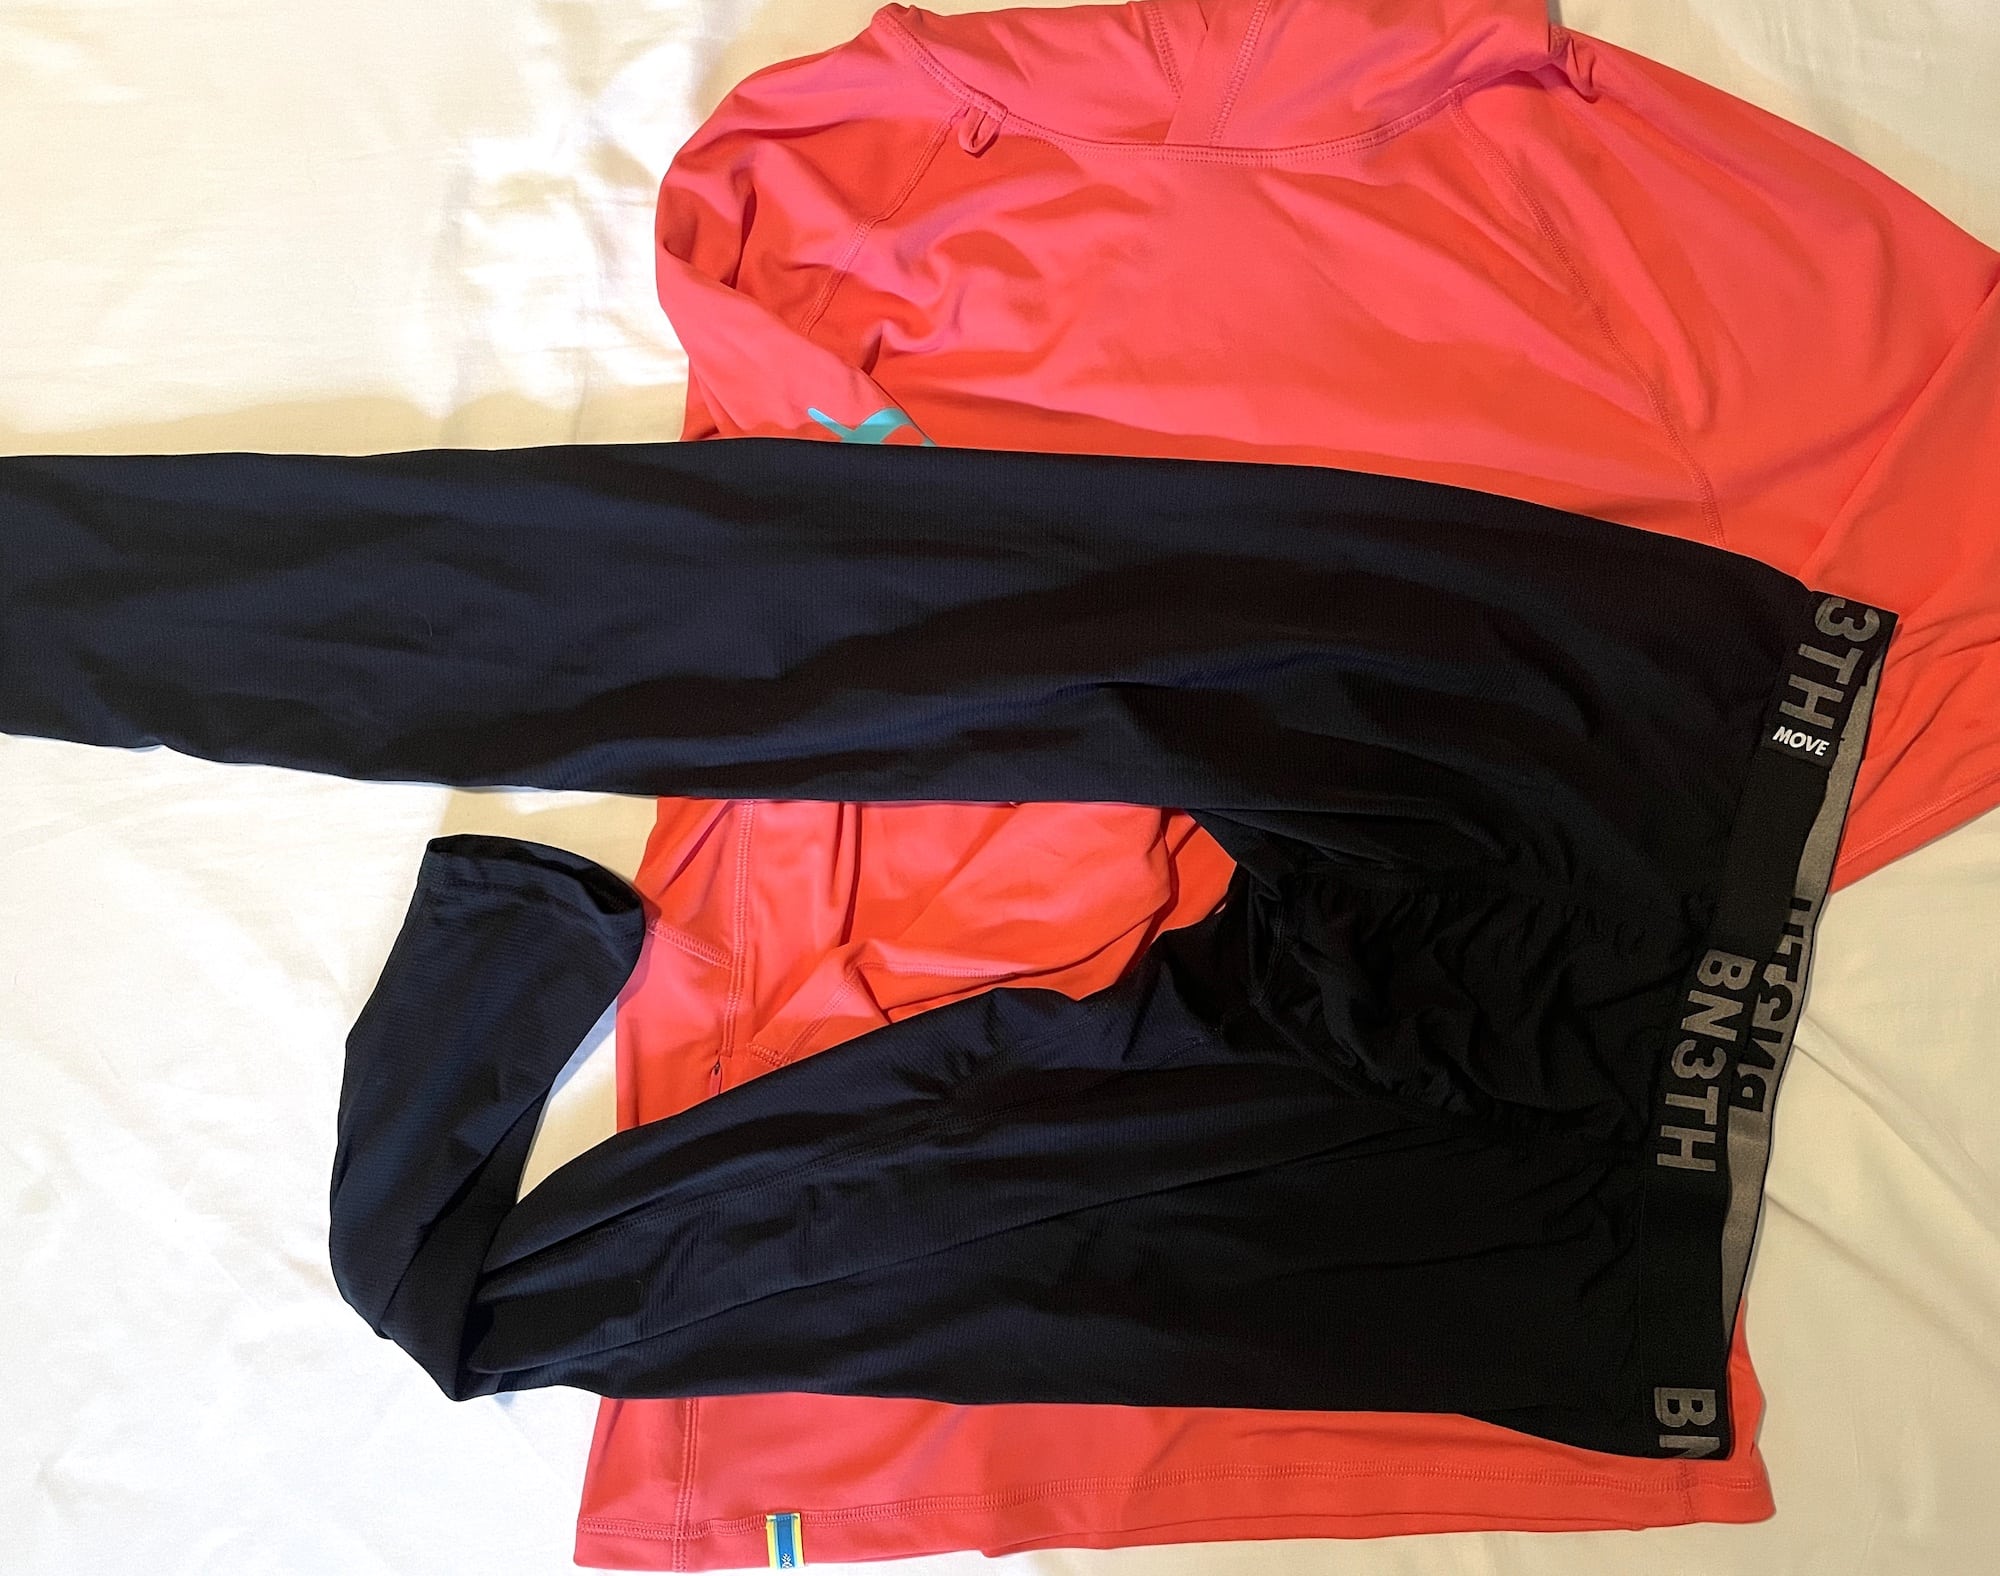 A base layer top and bottom - base layers are normally made of moisture-wicking fabrics